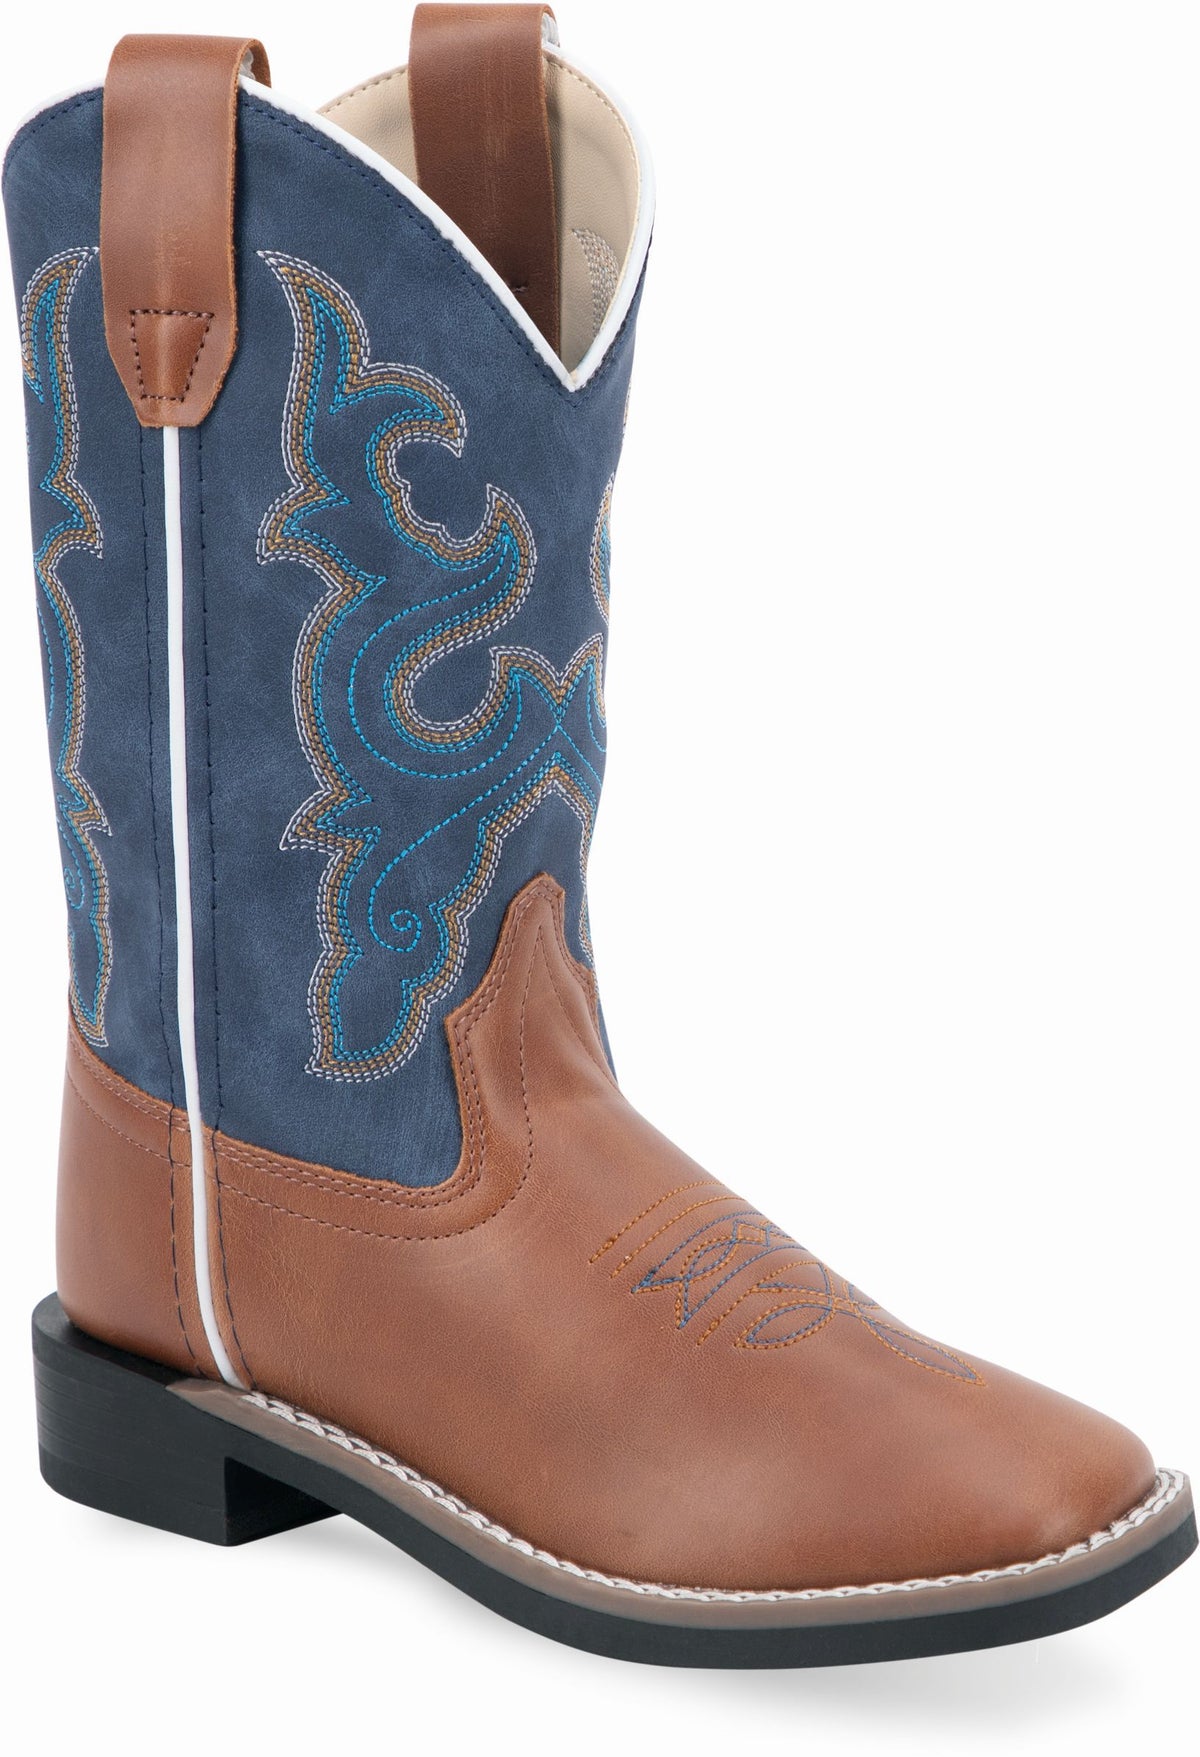 Old West Light Tan Foot Denim Blue Shaft Children All Over Leatherette Material Broad Square Toe Boots